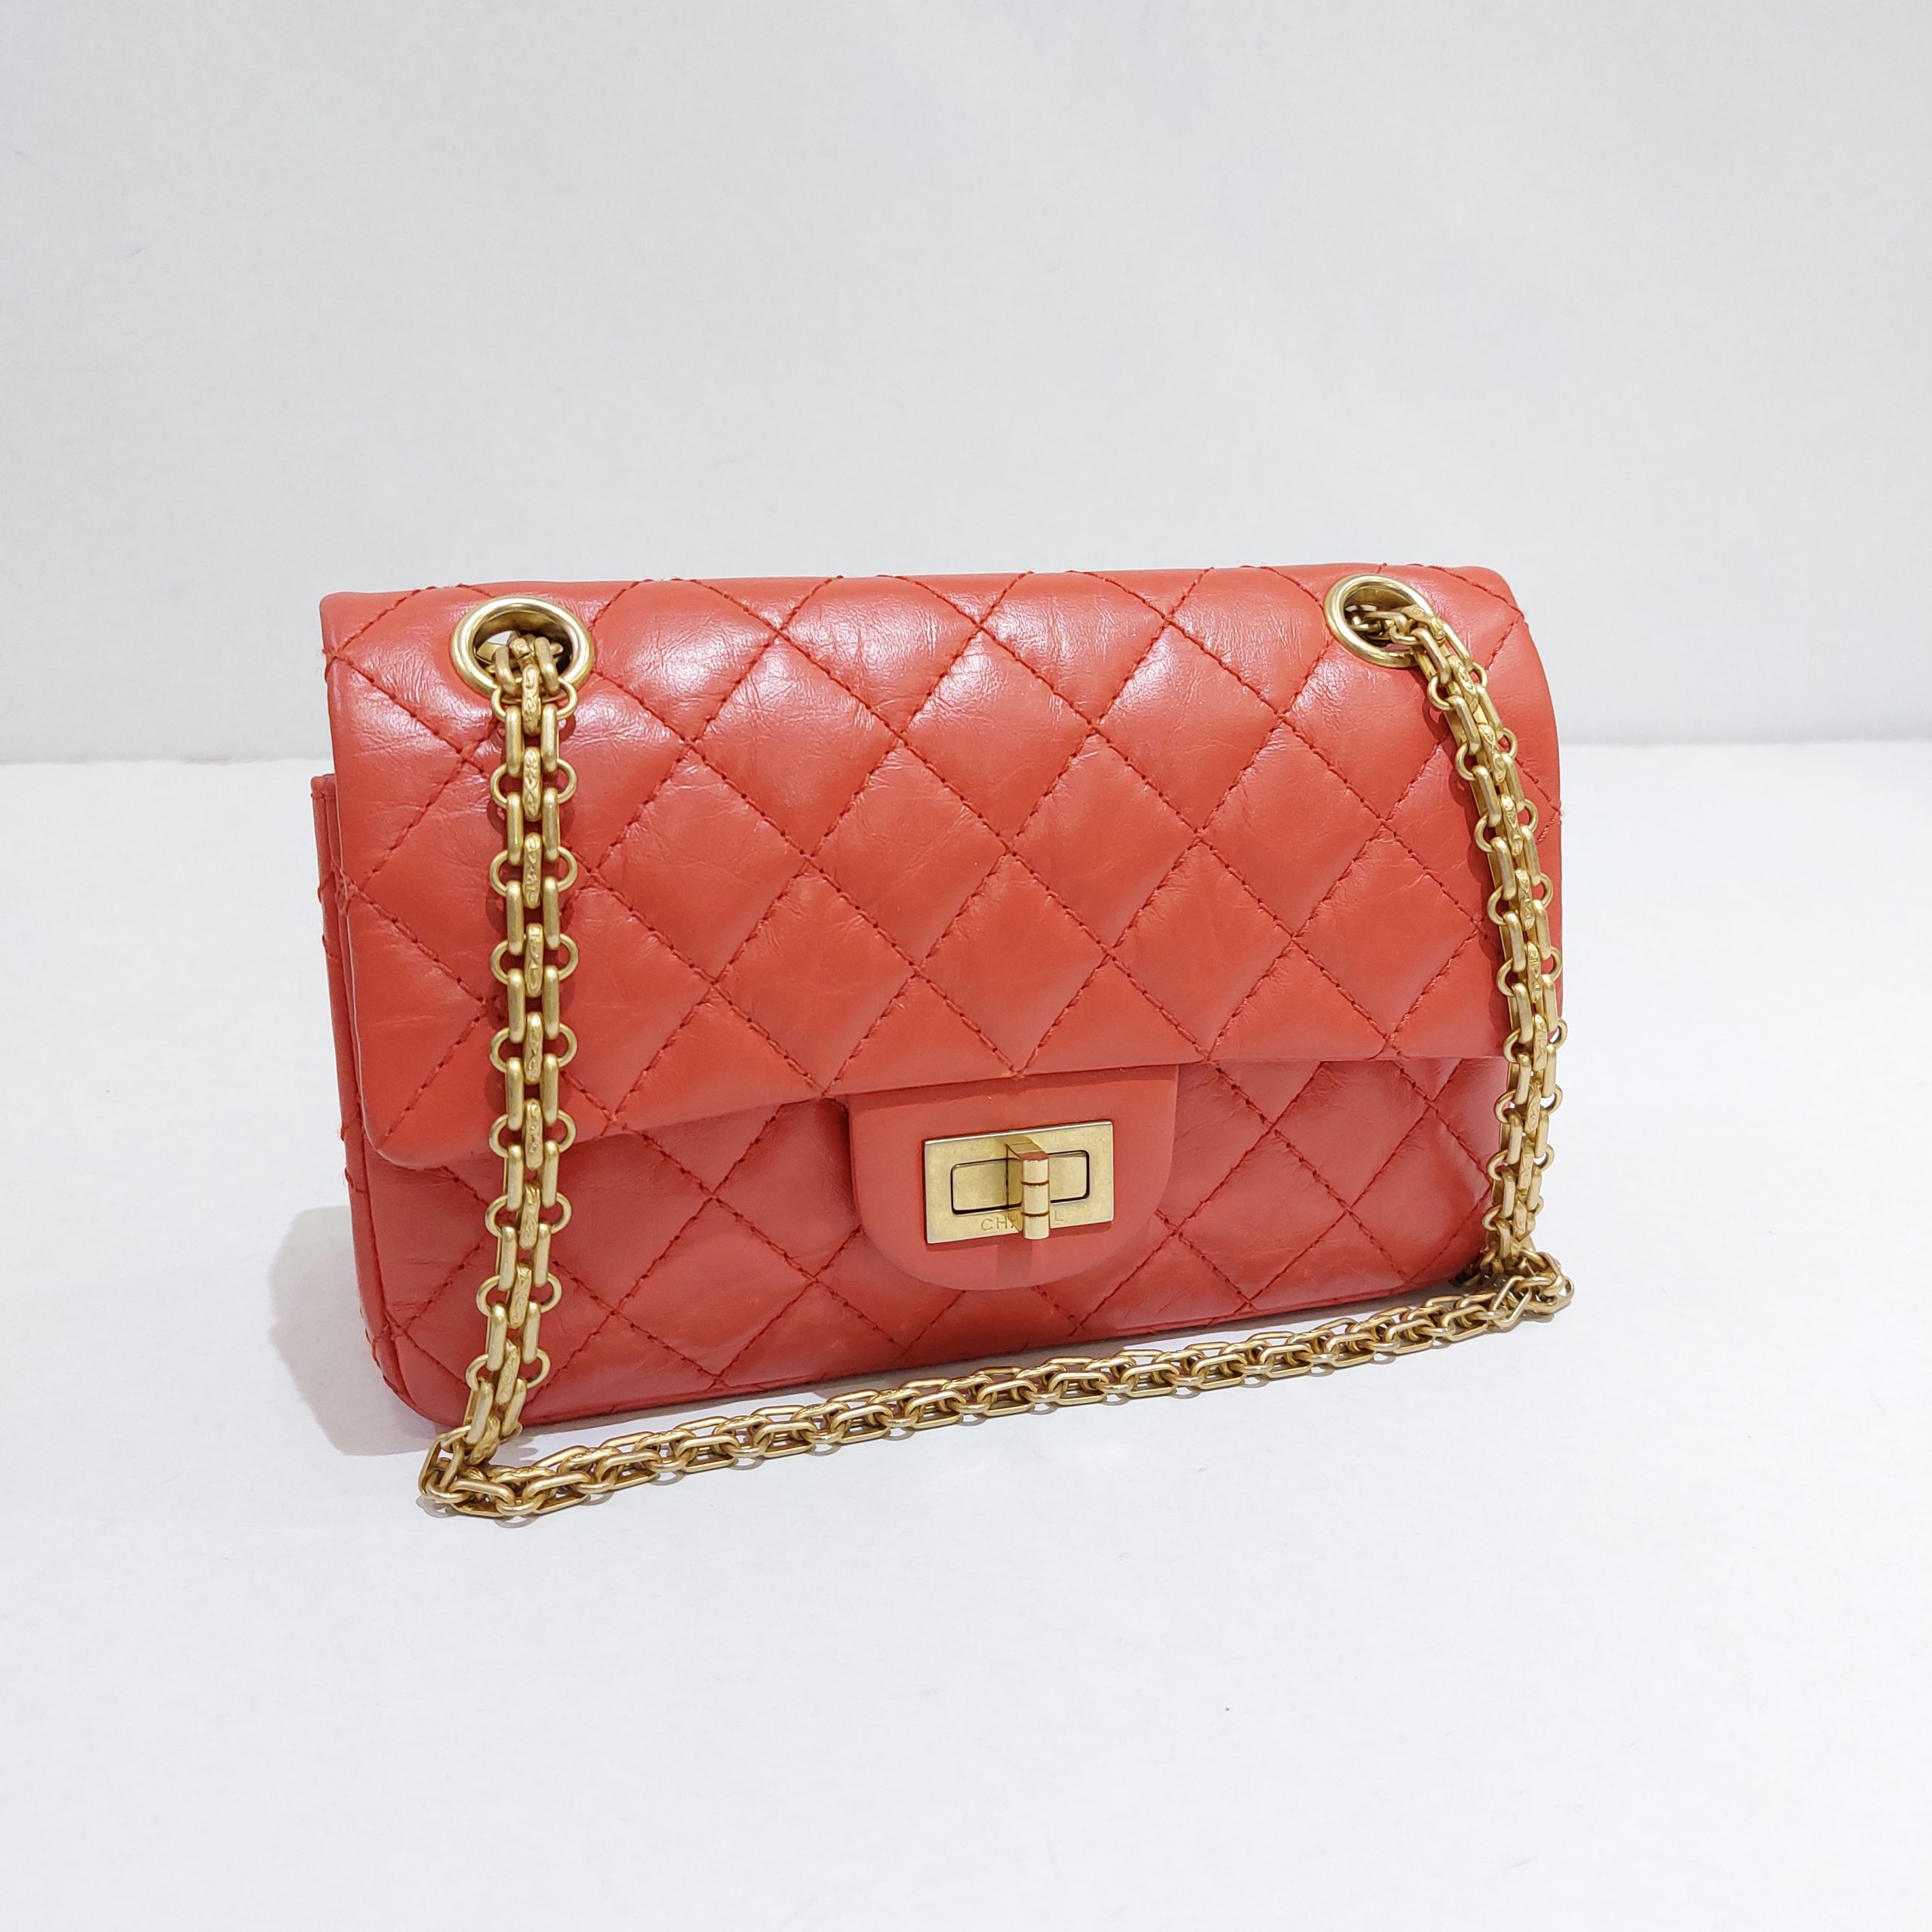 Chanel 255 Flap Bag Mini Reissue Leather Red  eBay